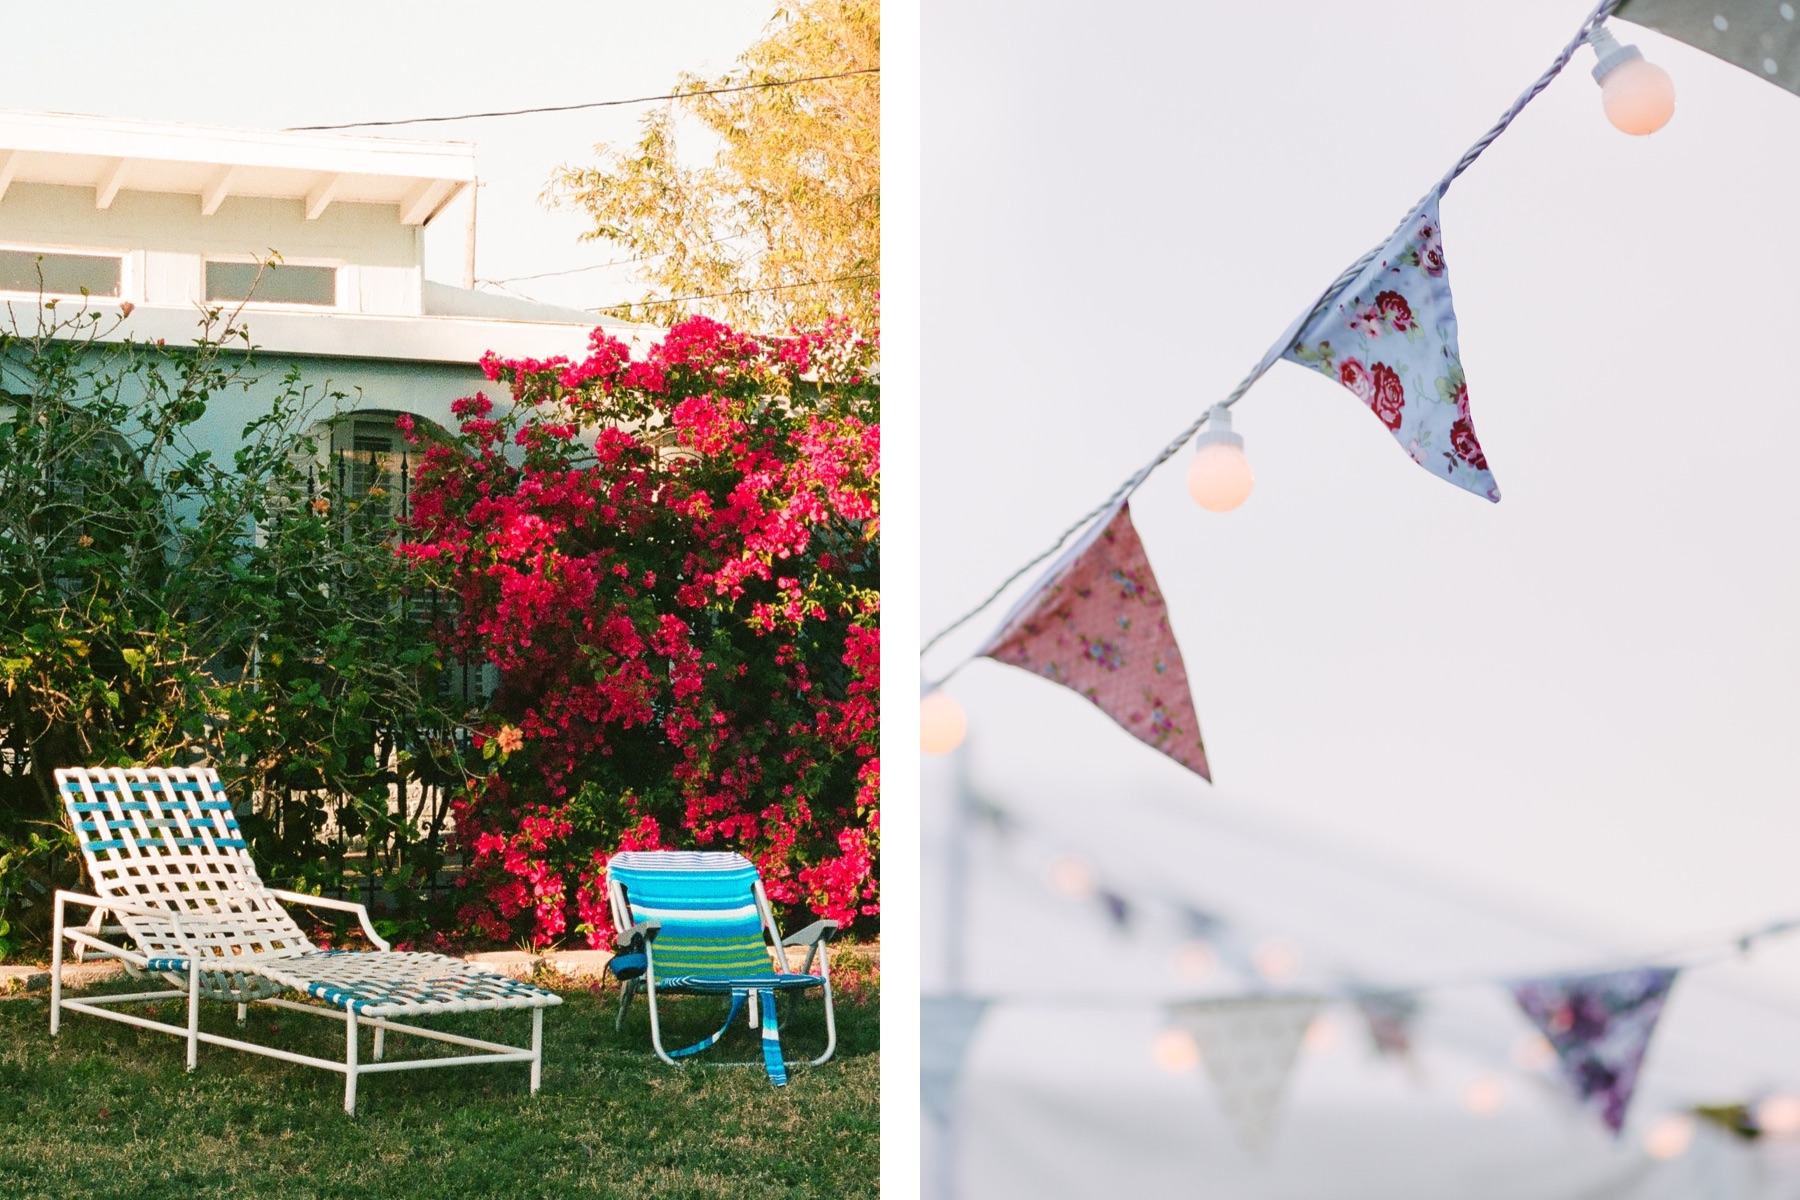 Left: Photo of lawn chairs in a lush backyard | Right: Decorative pennant banner blowing in the wind